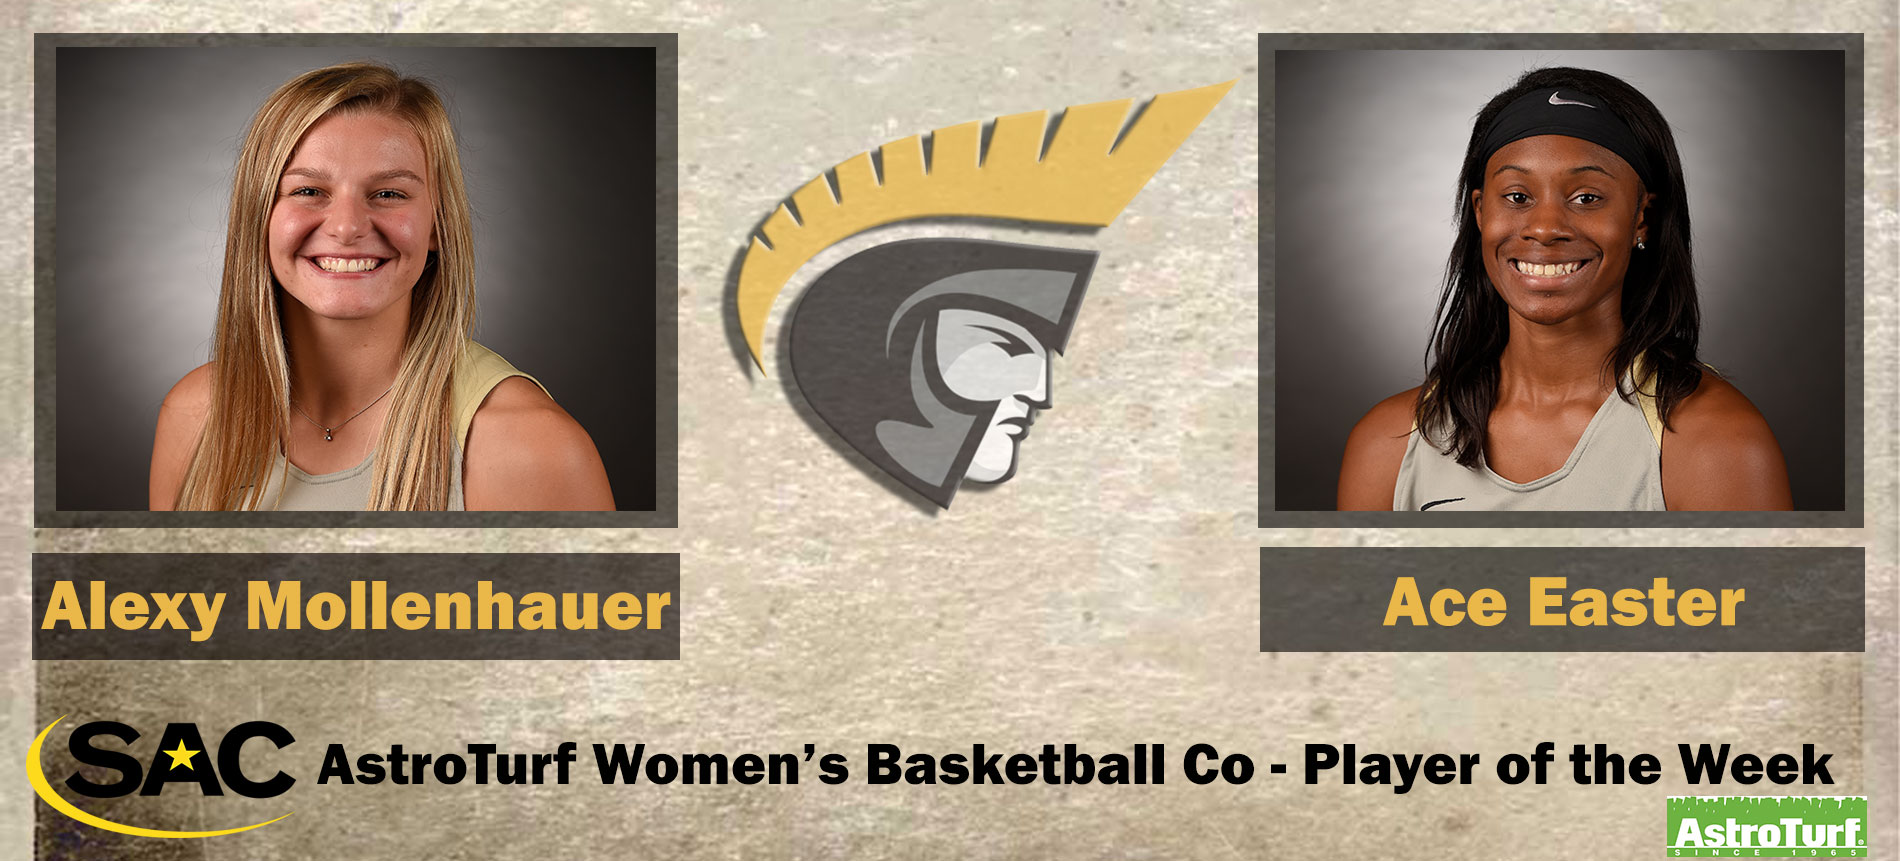 Mollenhauer and Easter Earn South Atlantic Conference AstroTurf Women’s Basketball Co-Player of the Week